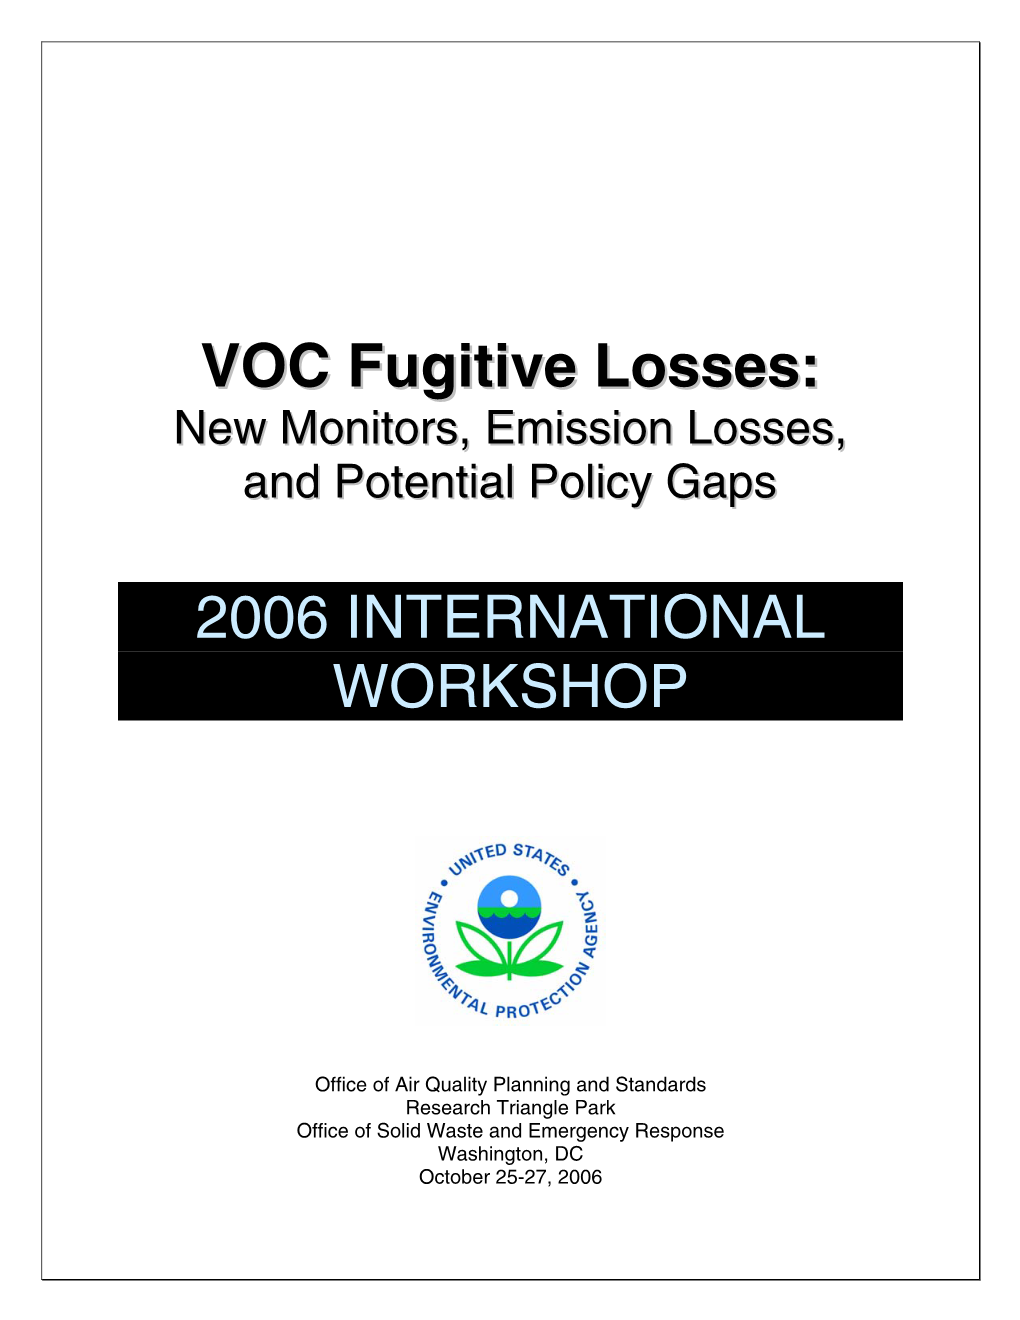 Voc Fugitive Losses -- New Monitors, Higher Emissions, and Potential Policy Gaps